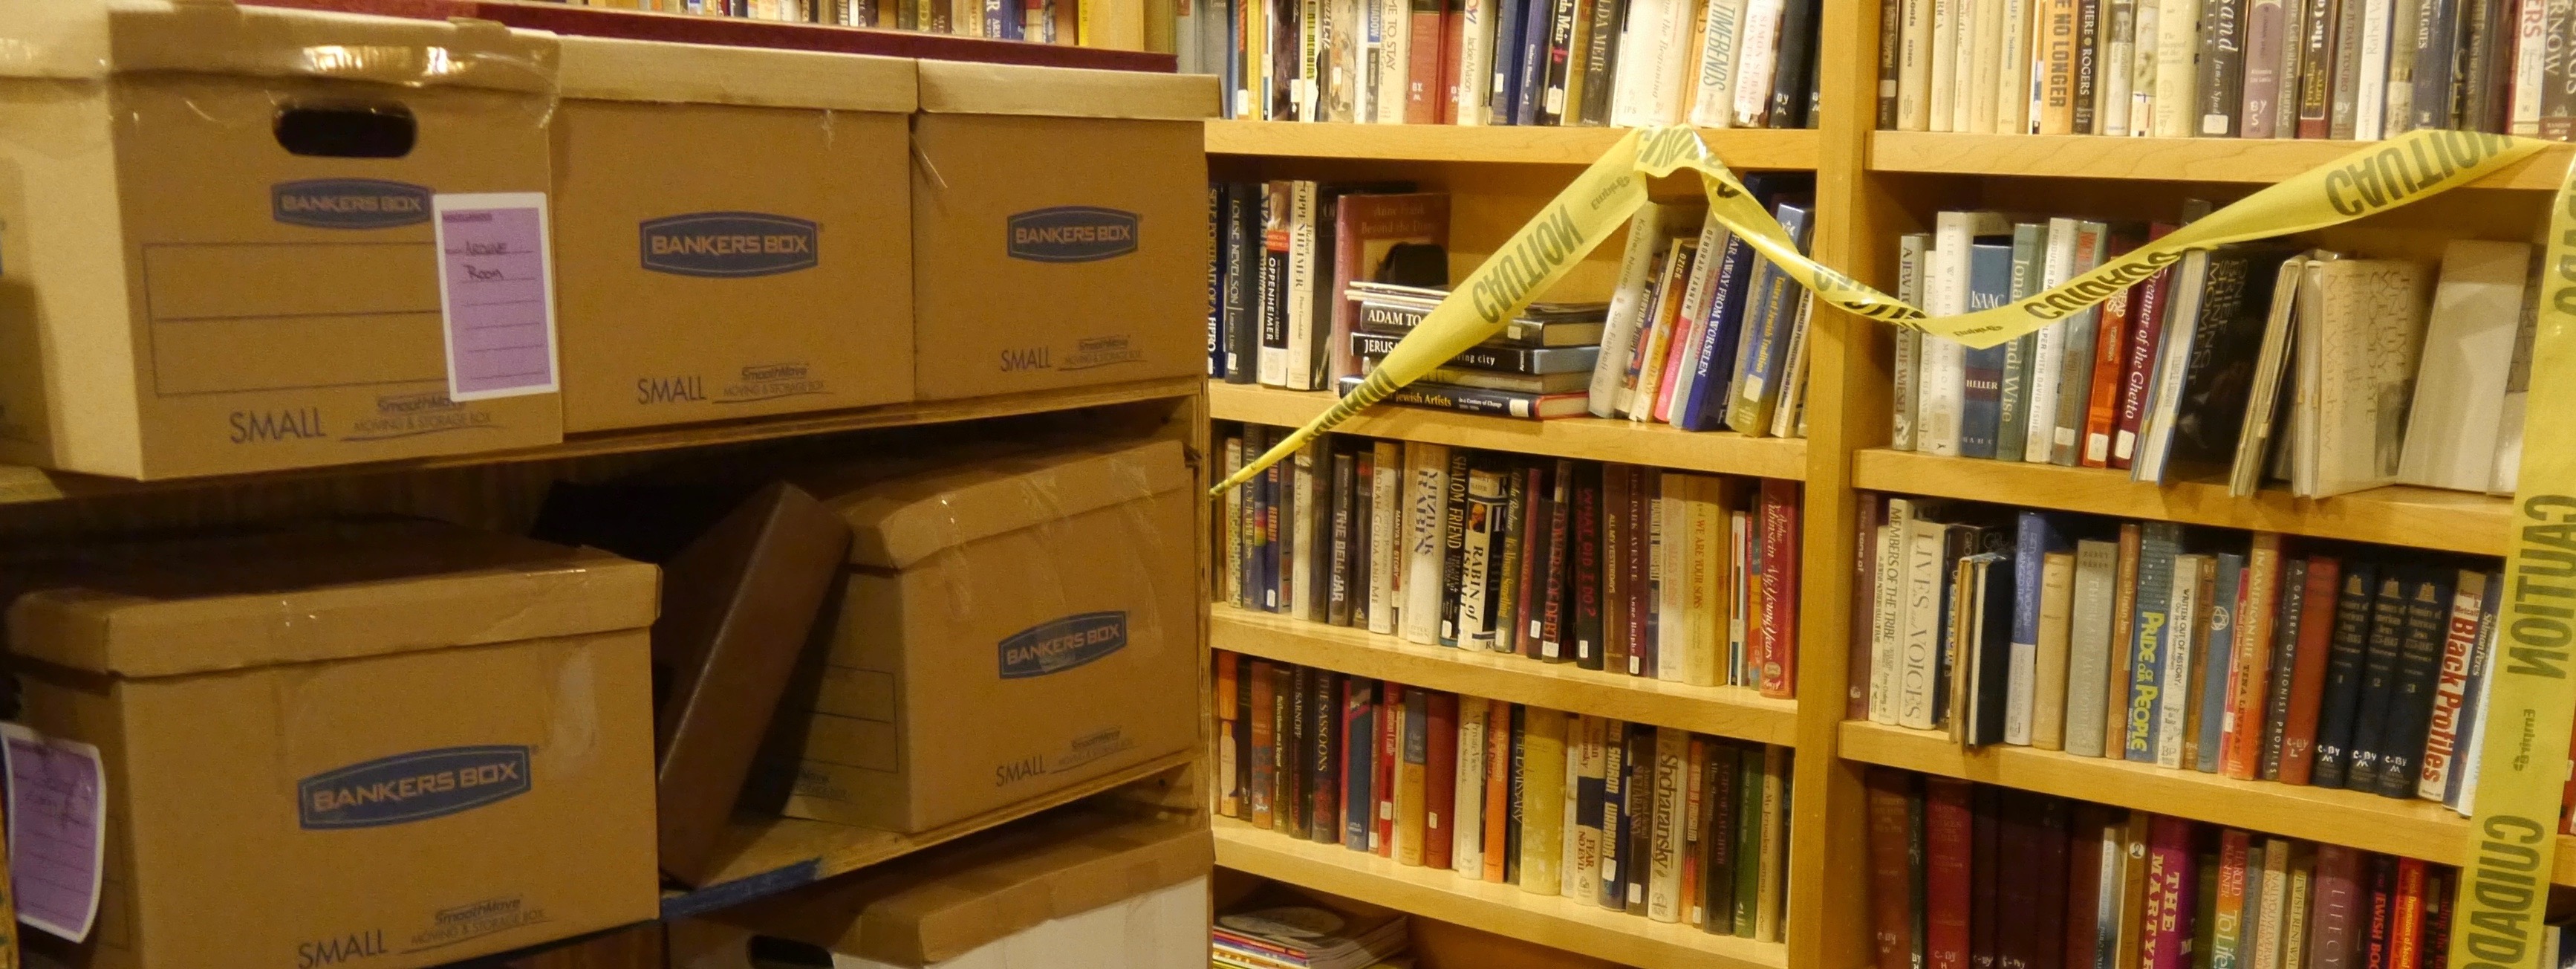 photograph of boxes and bookshelves